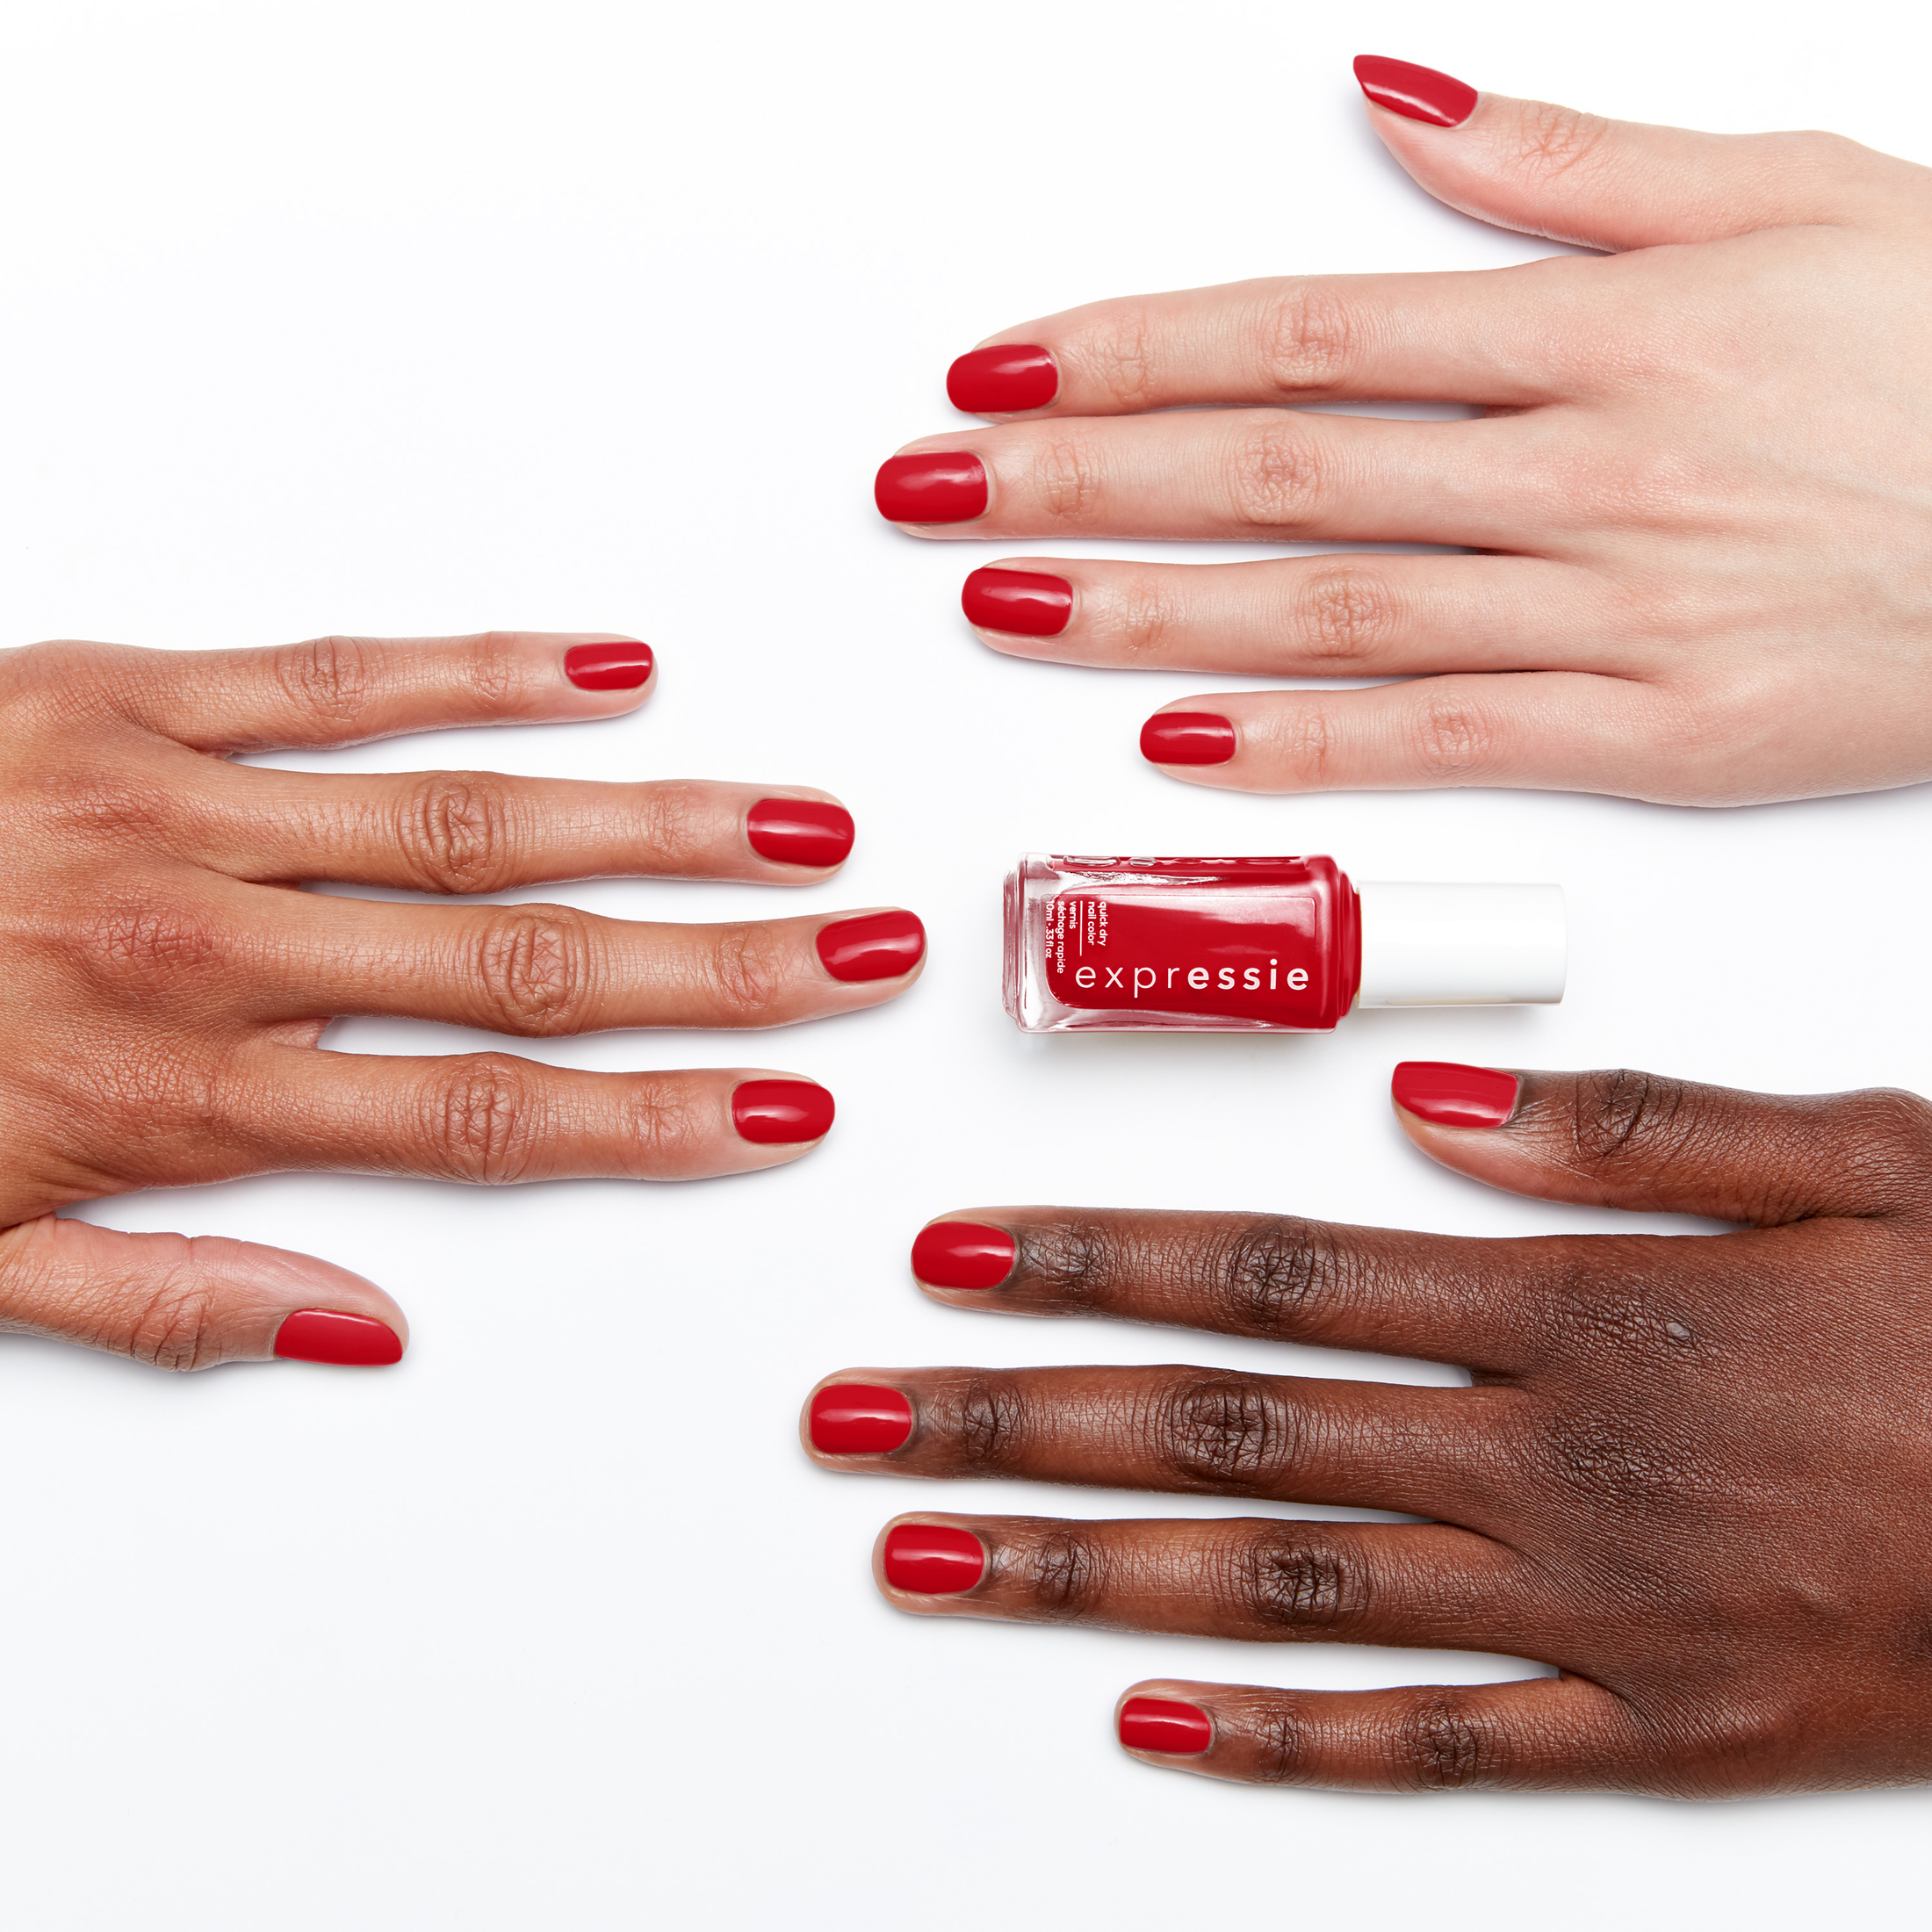 essie Expressie Quick Dry Nail Polish, Seize the Minute, Blue Toned Red, 0.33 fl oz Bottle - image 4 of 9